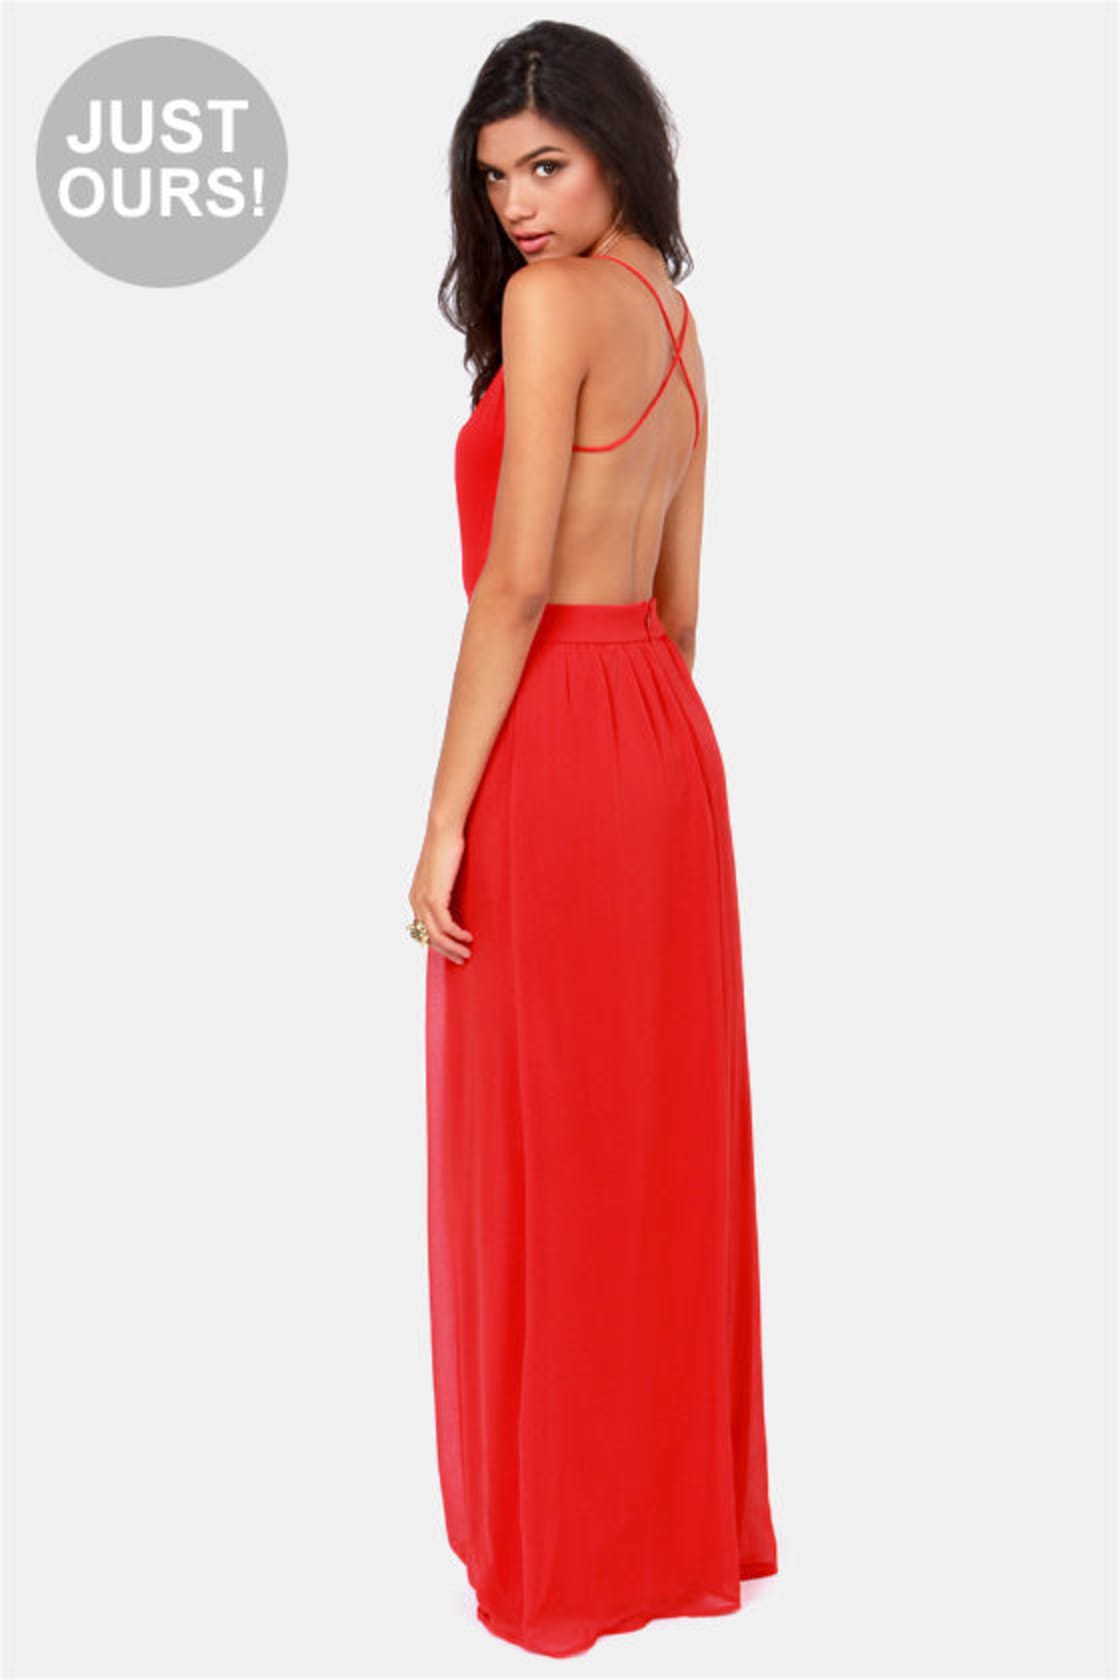 Sexy Red Backless Dress - Red Dress - Maxi Dress - Lulus